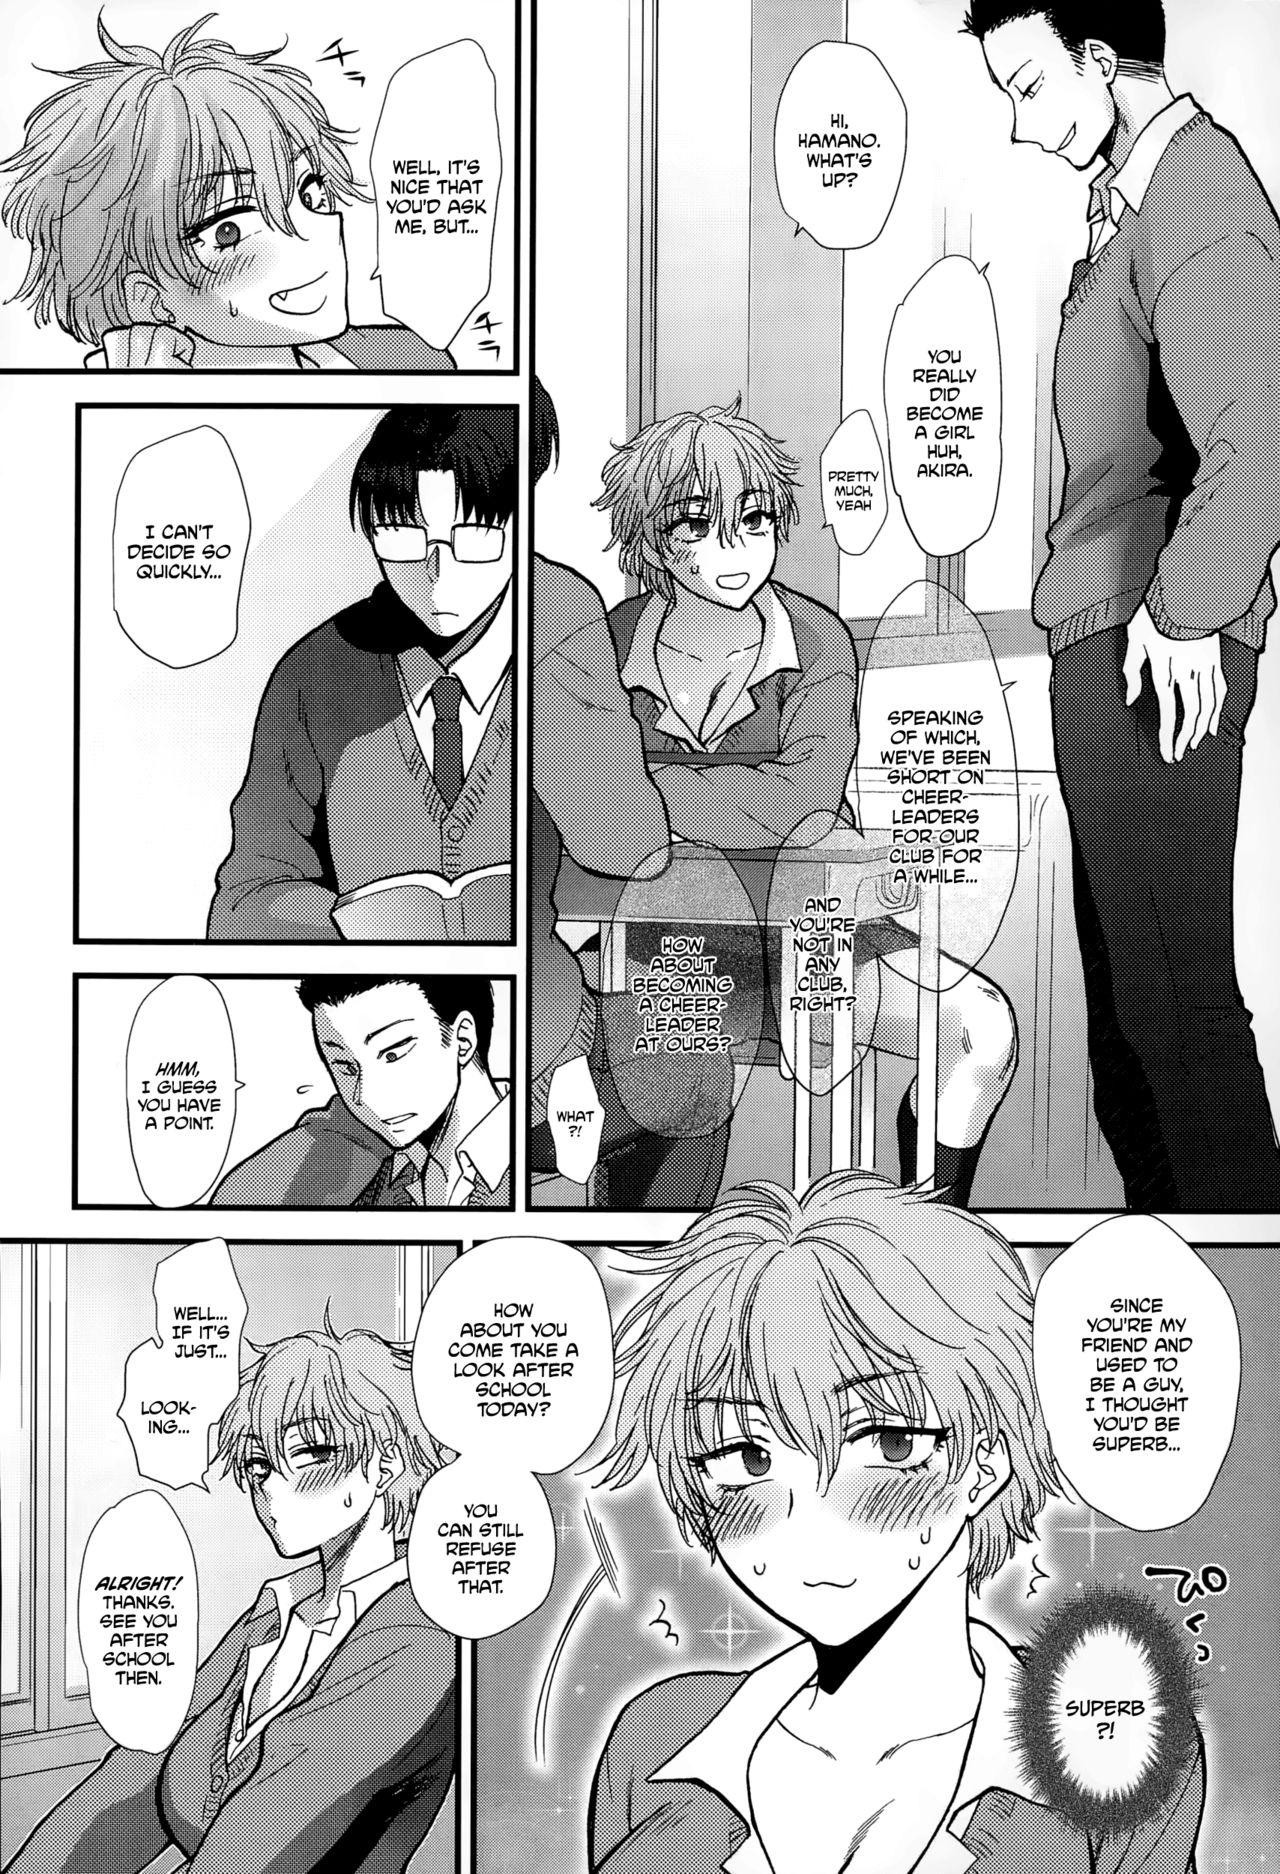 Best Blowjobs Shinyuu Affection - Best Friend Affection Spanking - Page 6